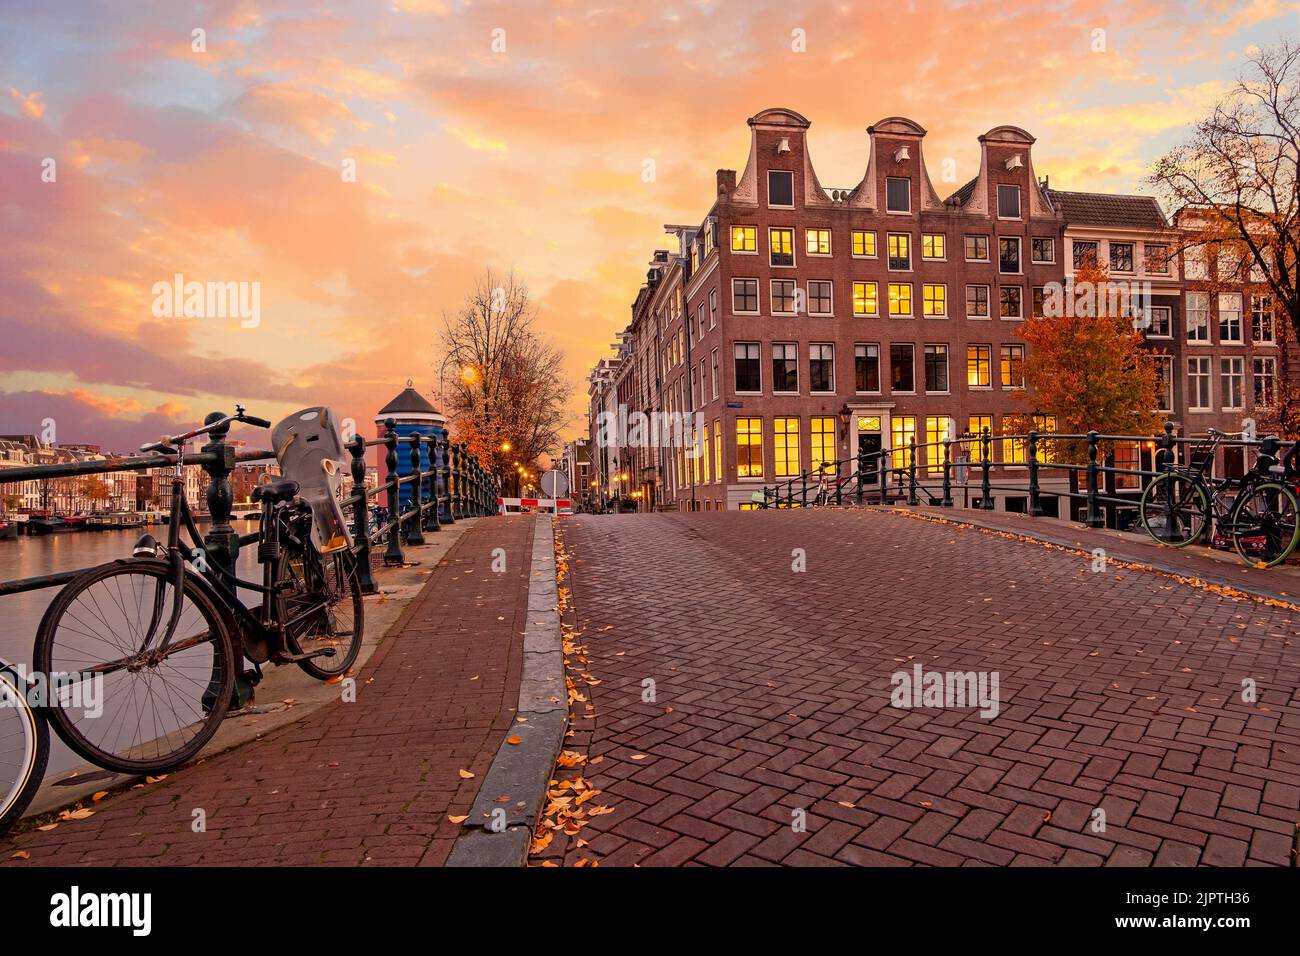 City scenic from Amsterdam at the Amstel in the Netherlands at sunset Stock Photo